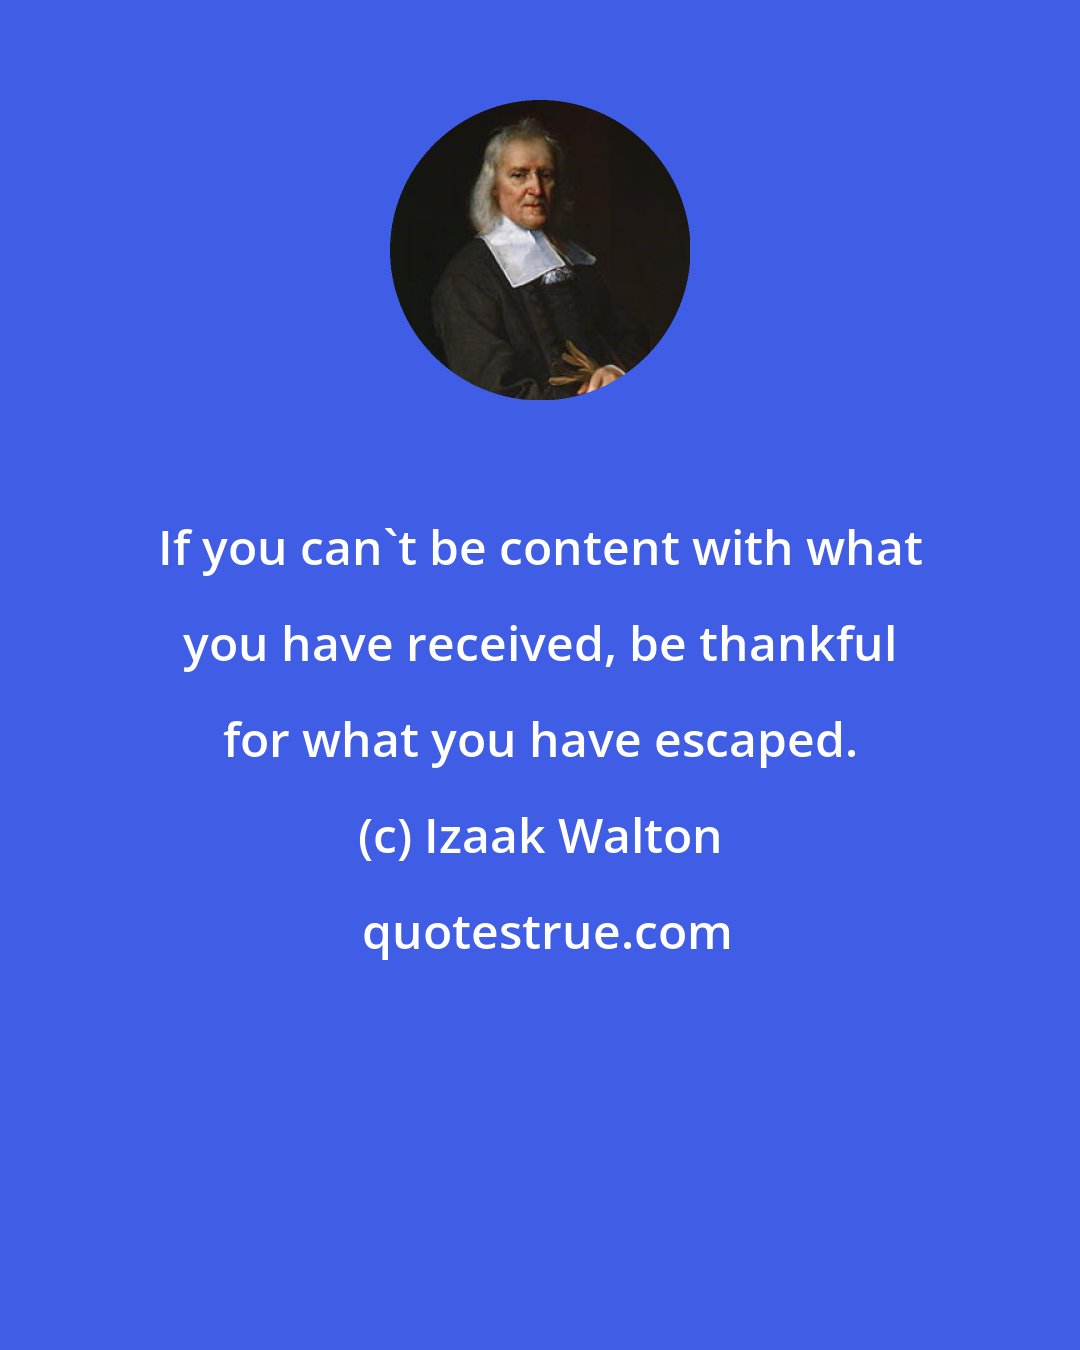 Izaak Walton: If you can't be content with what you have received, be thankful for what you have escaped.